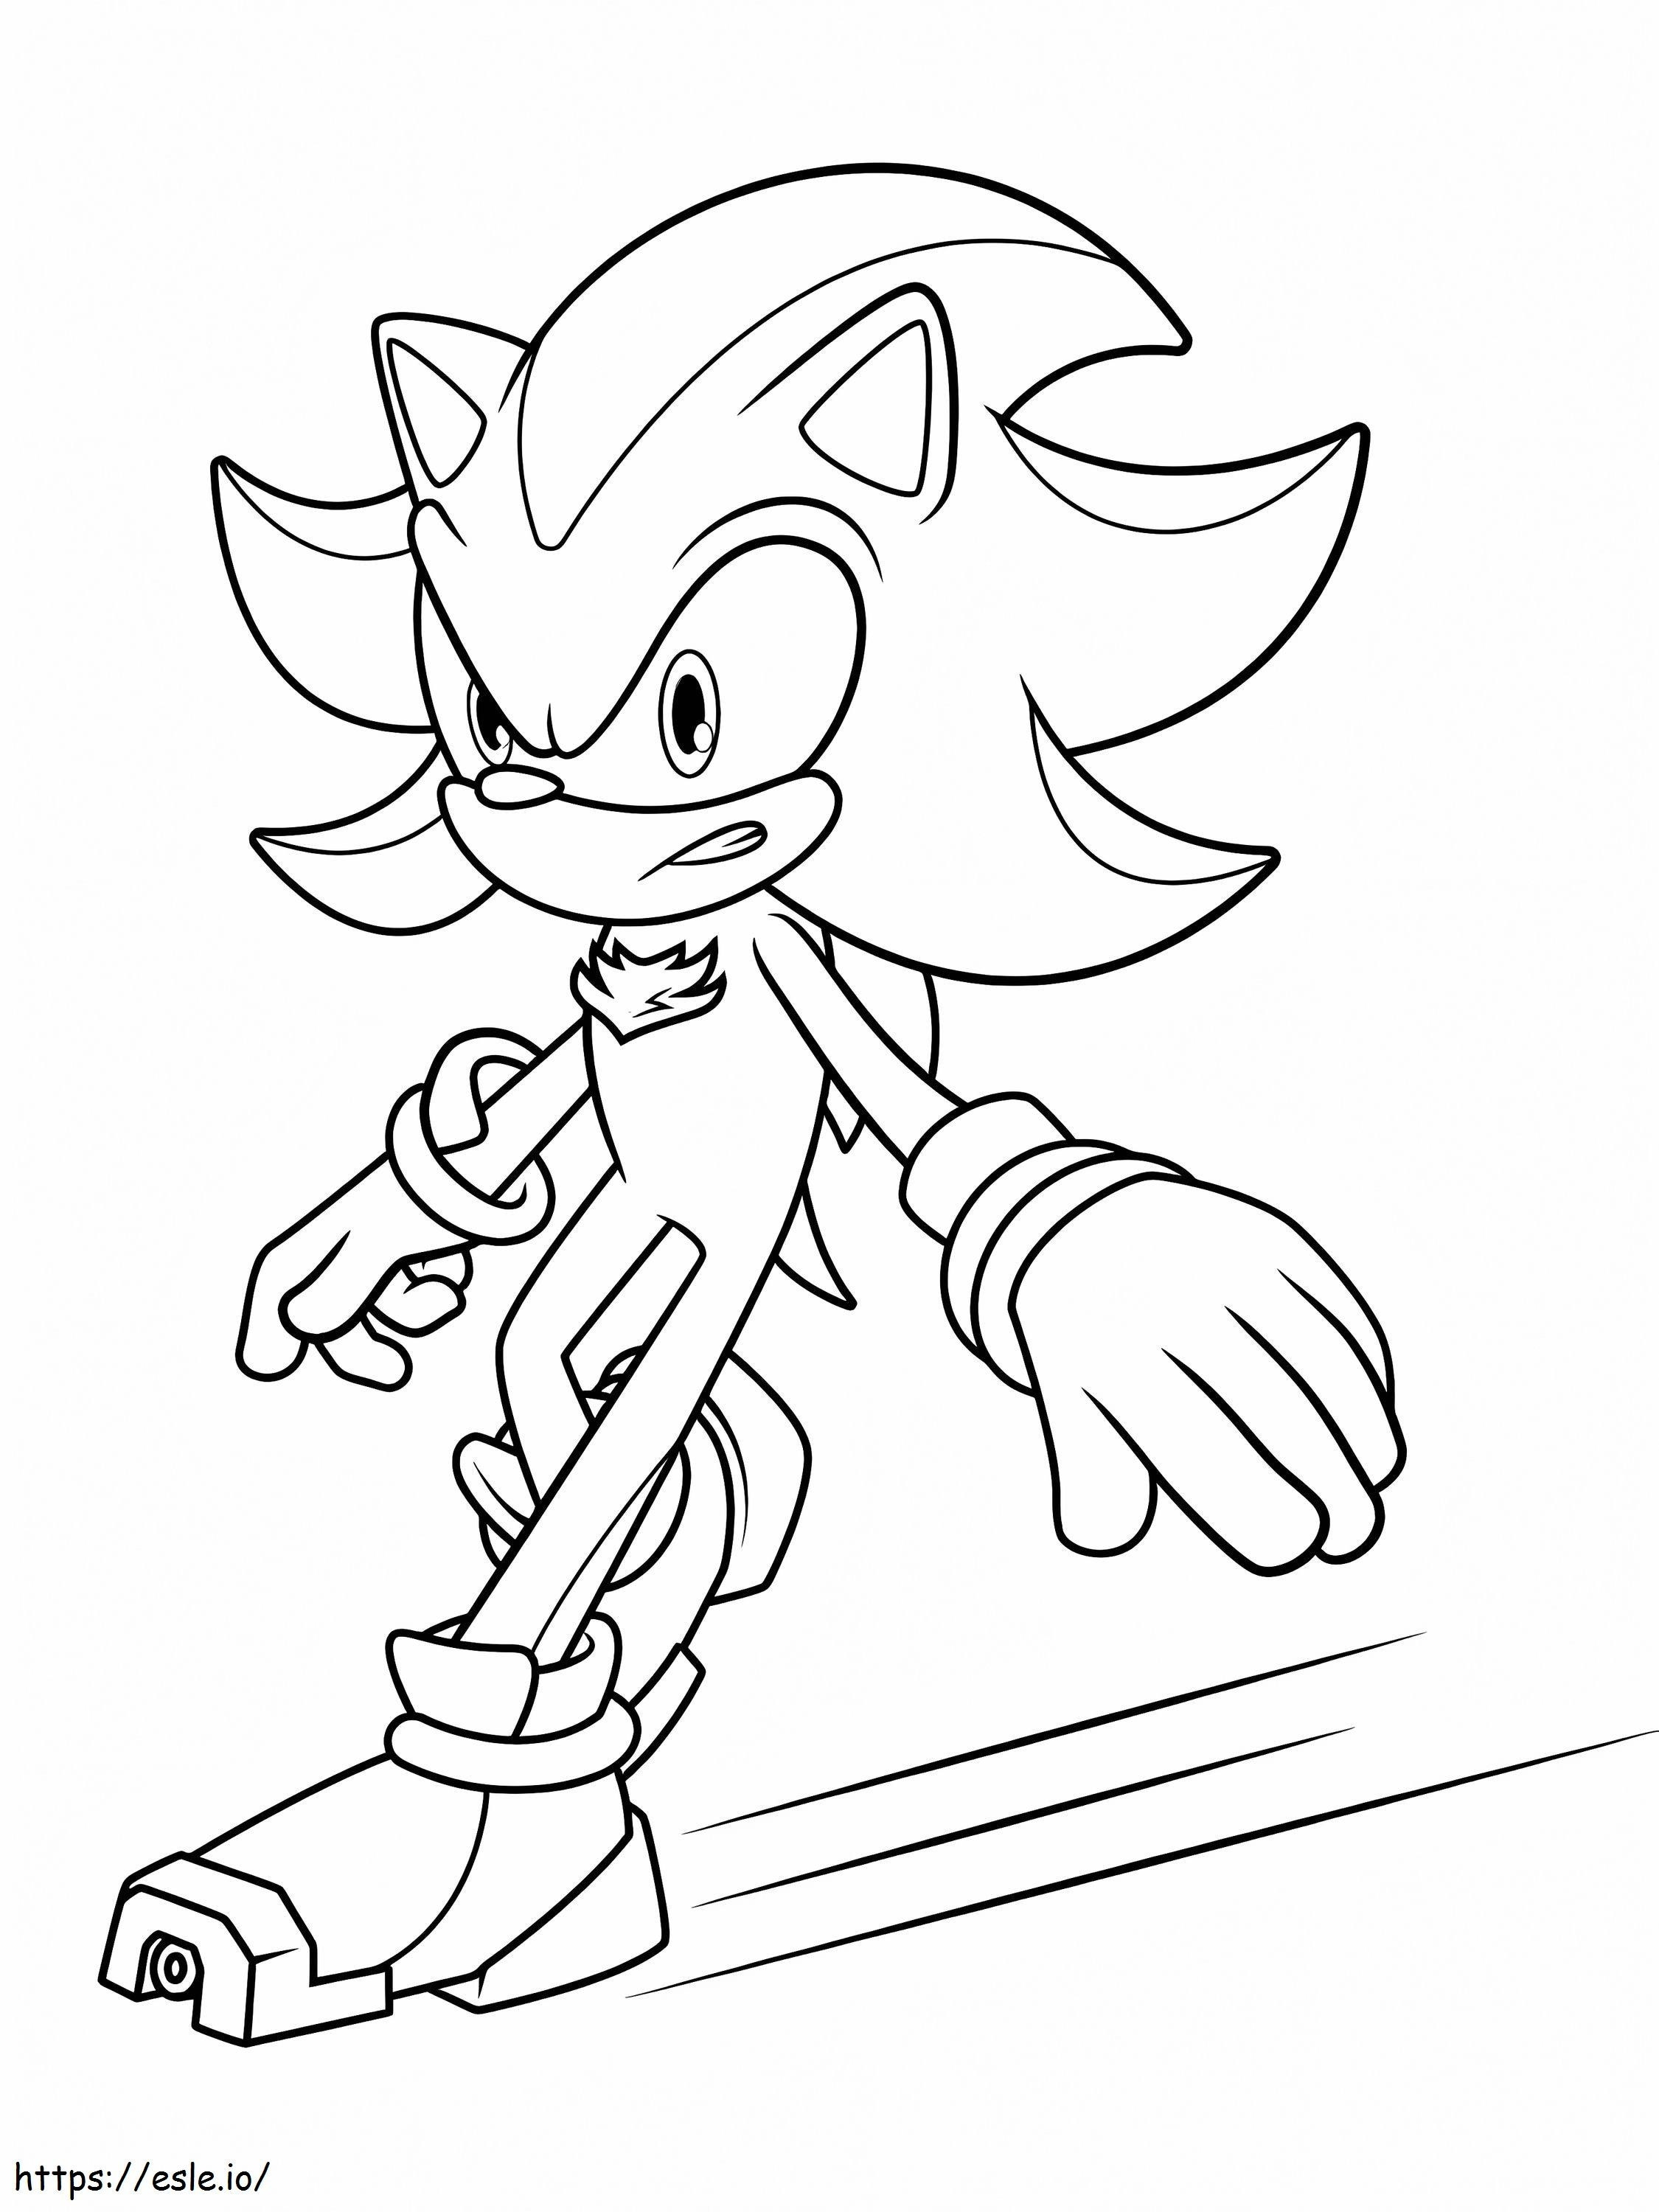 Shadow The Hedgehog 2 coloring page